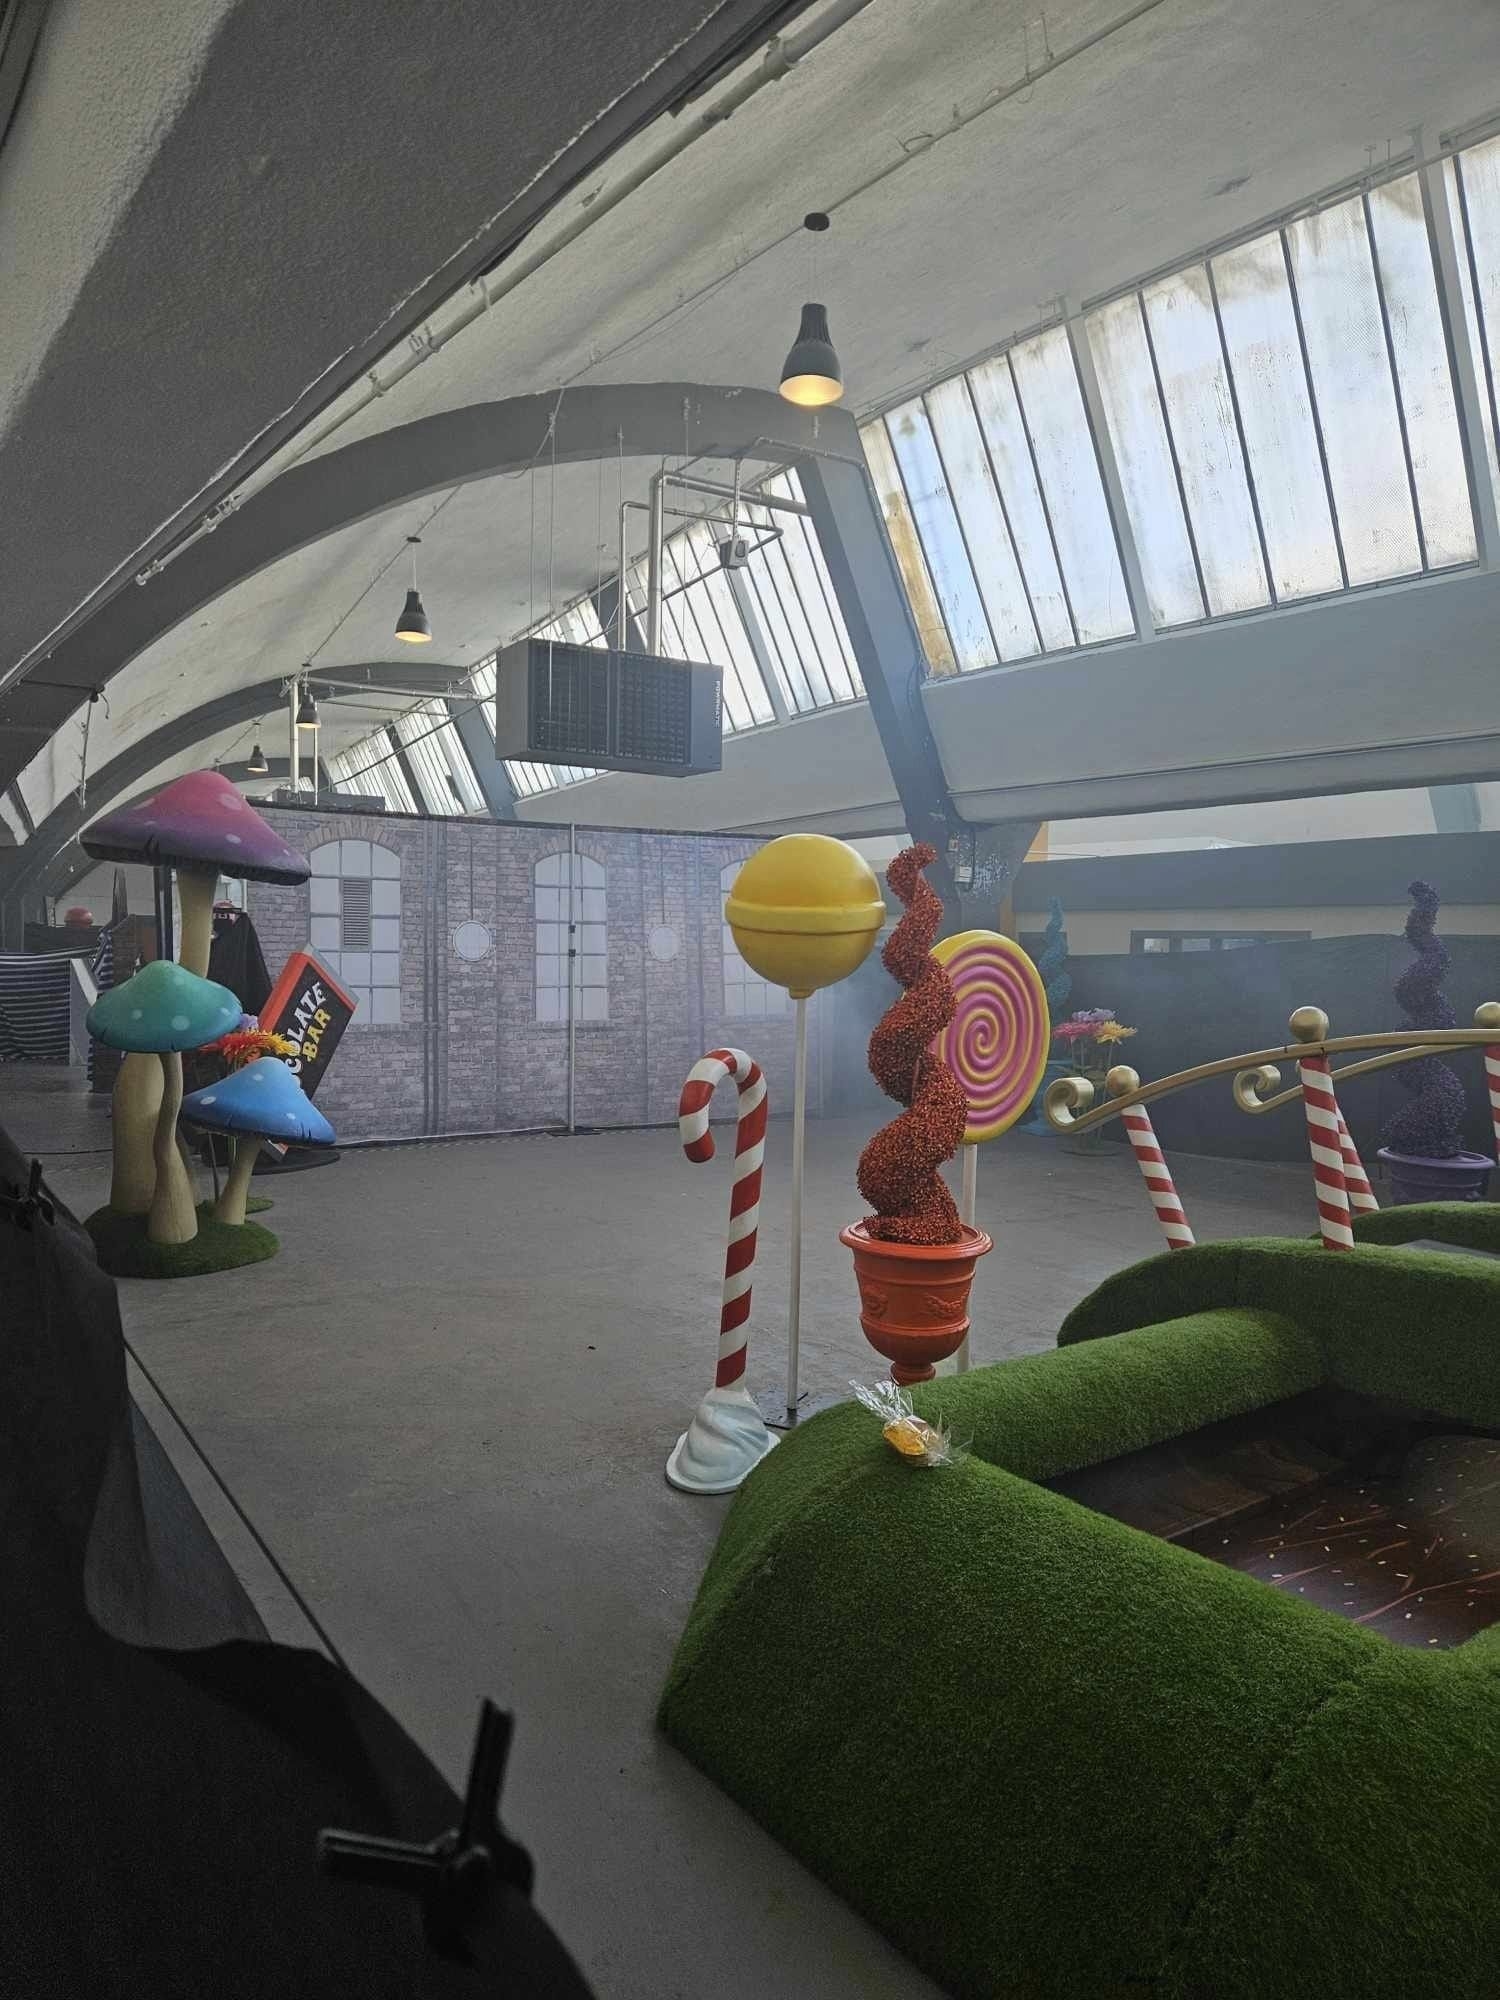 Indoor candy-themed miniature golf course with oversize candy decorations and artificial turf